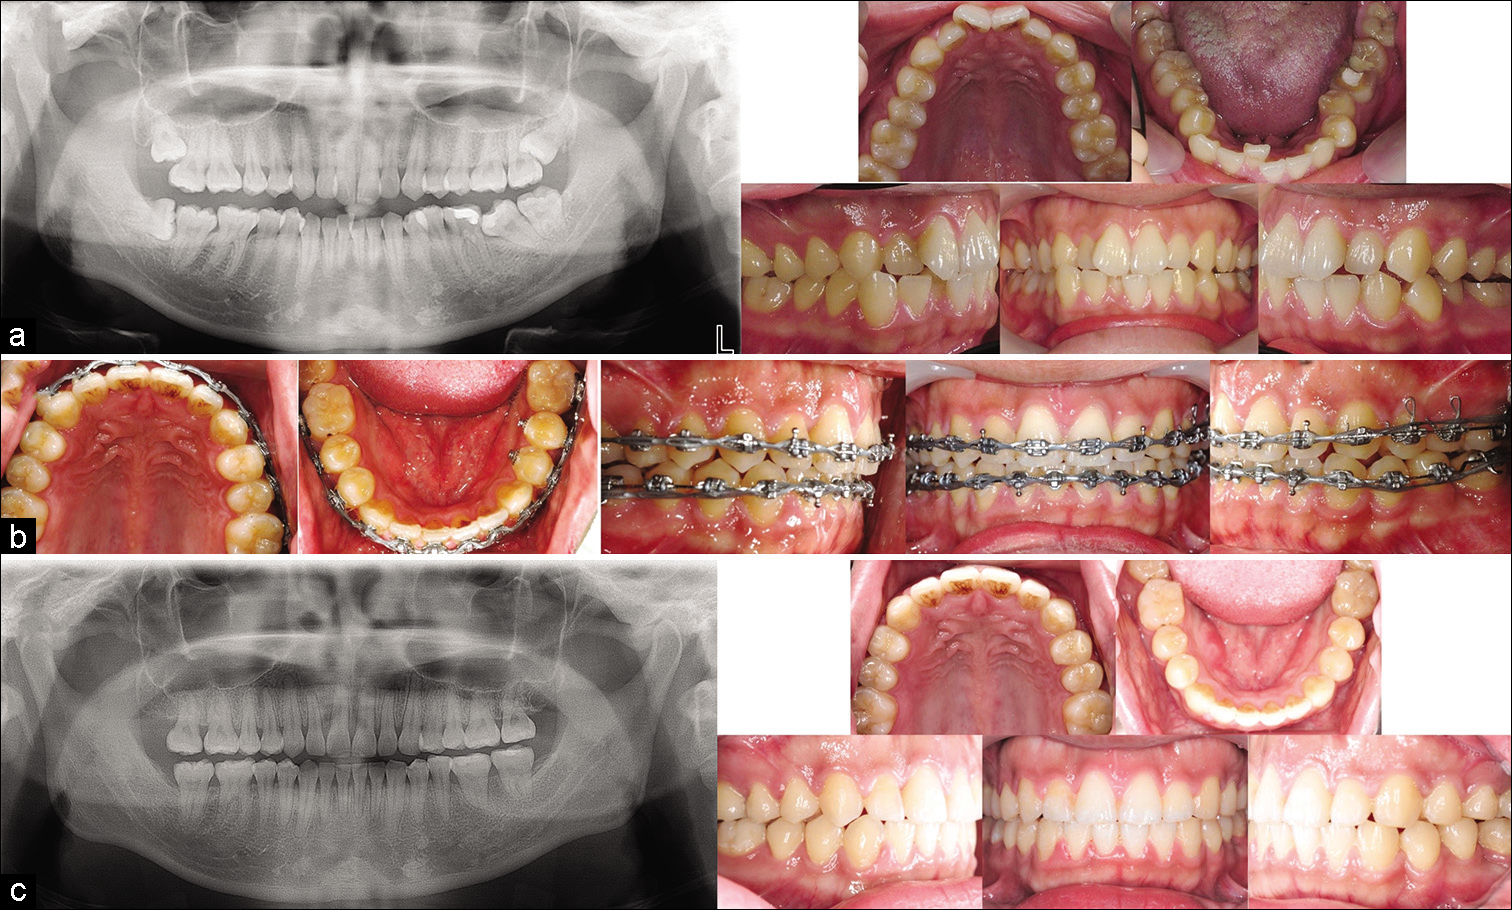 Case 1: (a) Initial records; (b) Mid-treatment records, metal brackets (Ormco, CA, USA) with 0.018-in slots for the anterior teeth and 0.022-in slots for the posterior teeth. The initial wires were 0.016-in NiTi and 0.016 × 0.022-in NiTi, the working wire was 0.016 × 0.022- in SS, and the finishing wire was 0.017 × 0.025-in TMA; (c) Post-treatment records.